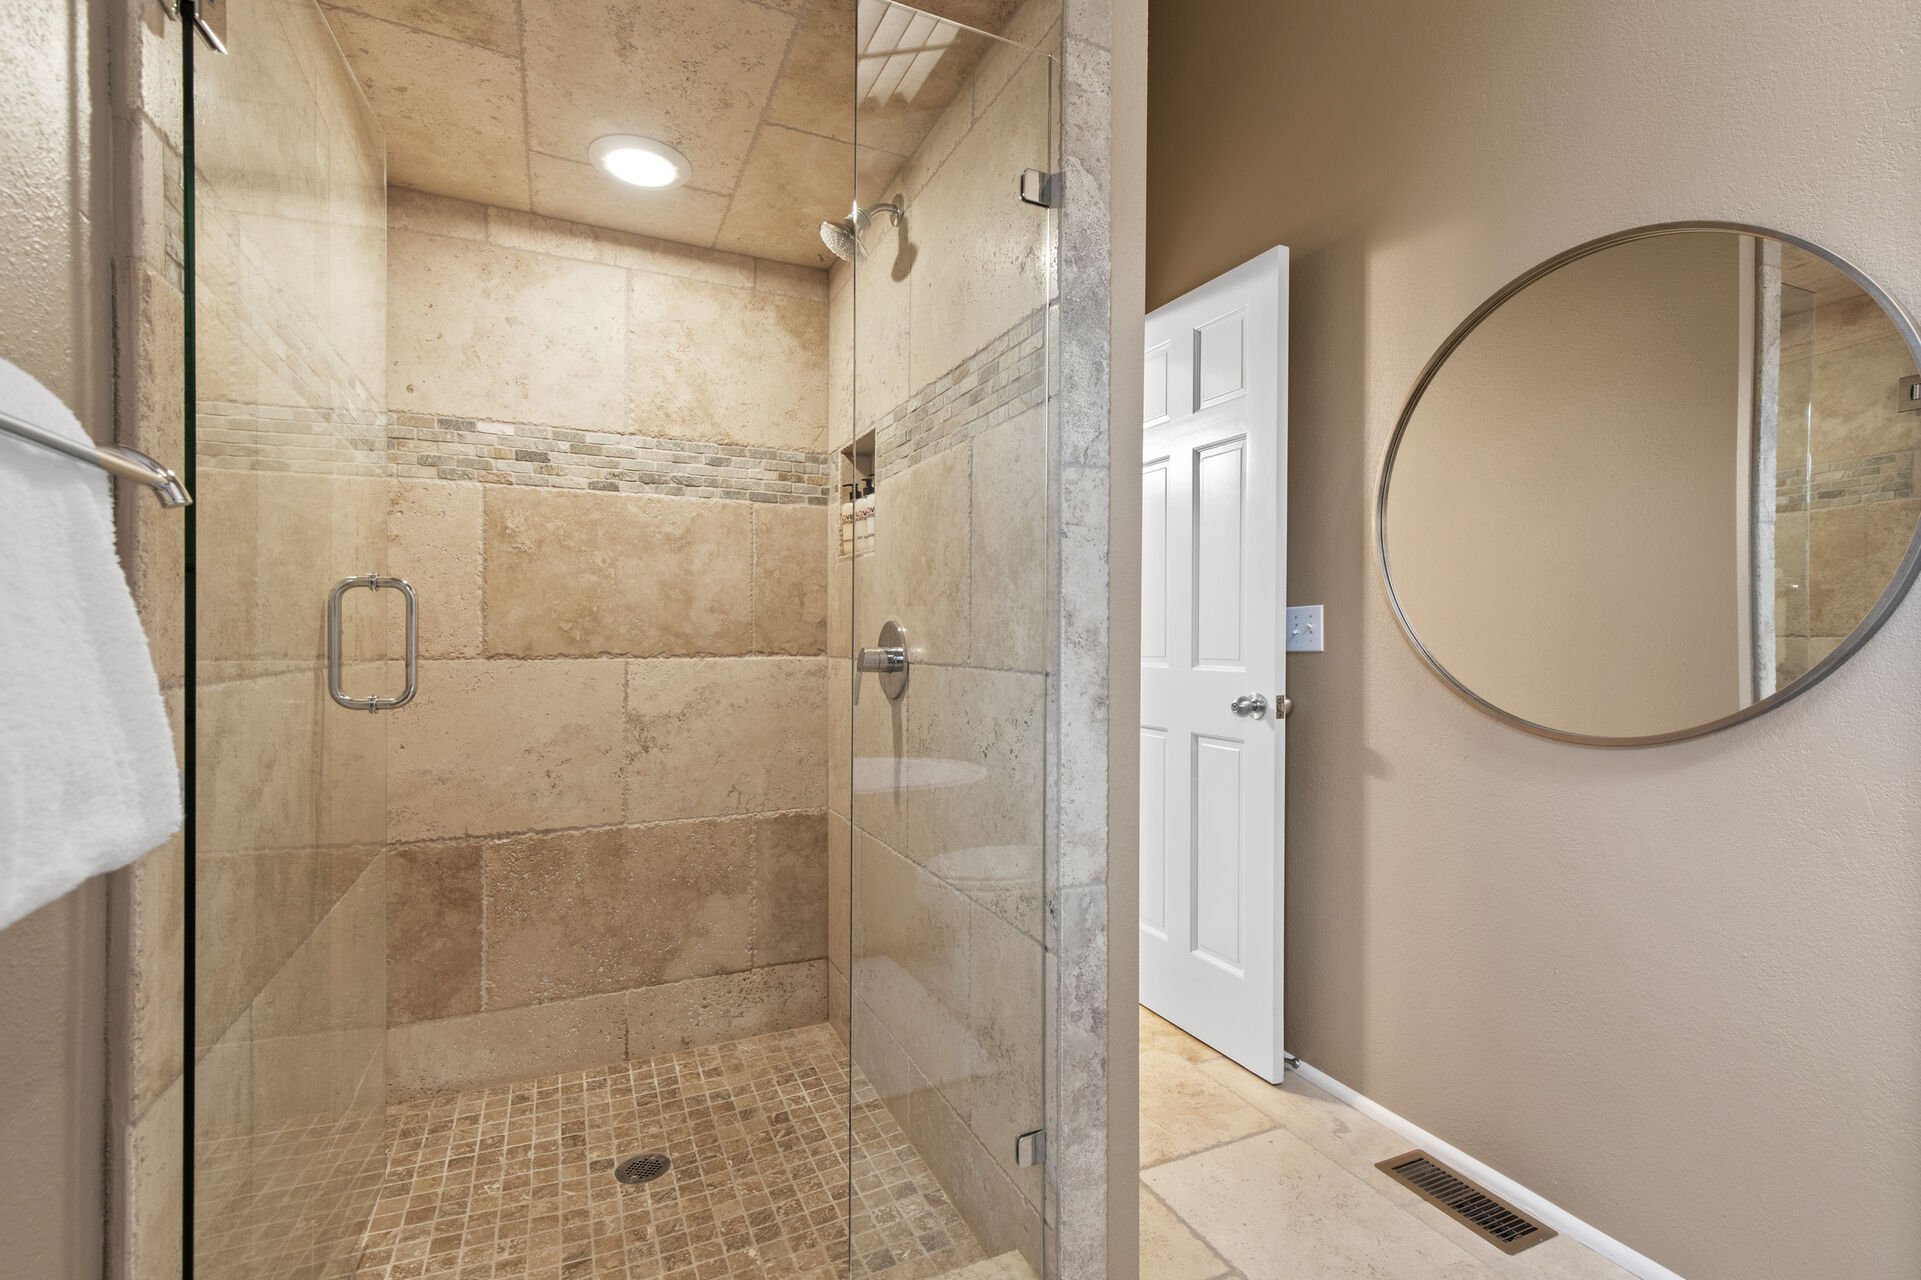 King size bed, walk-in closet, private balcony, and private bath with double sinks, tile shower and separate over-sized soaking tub